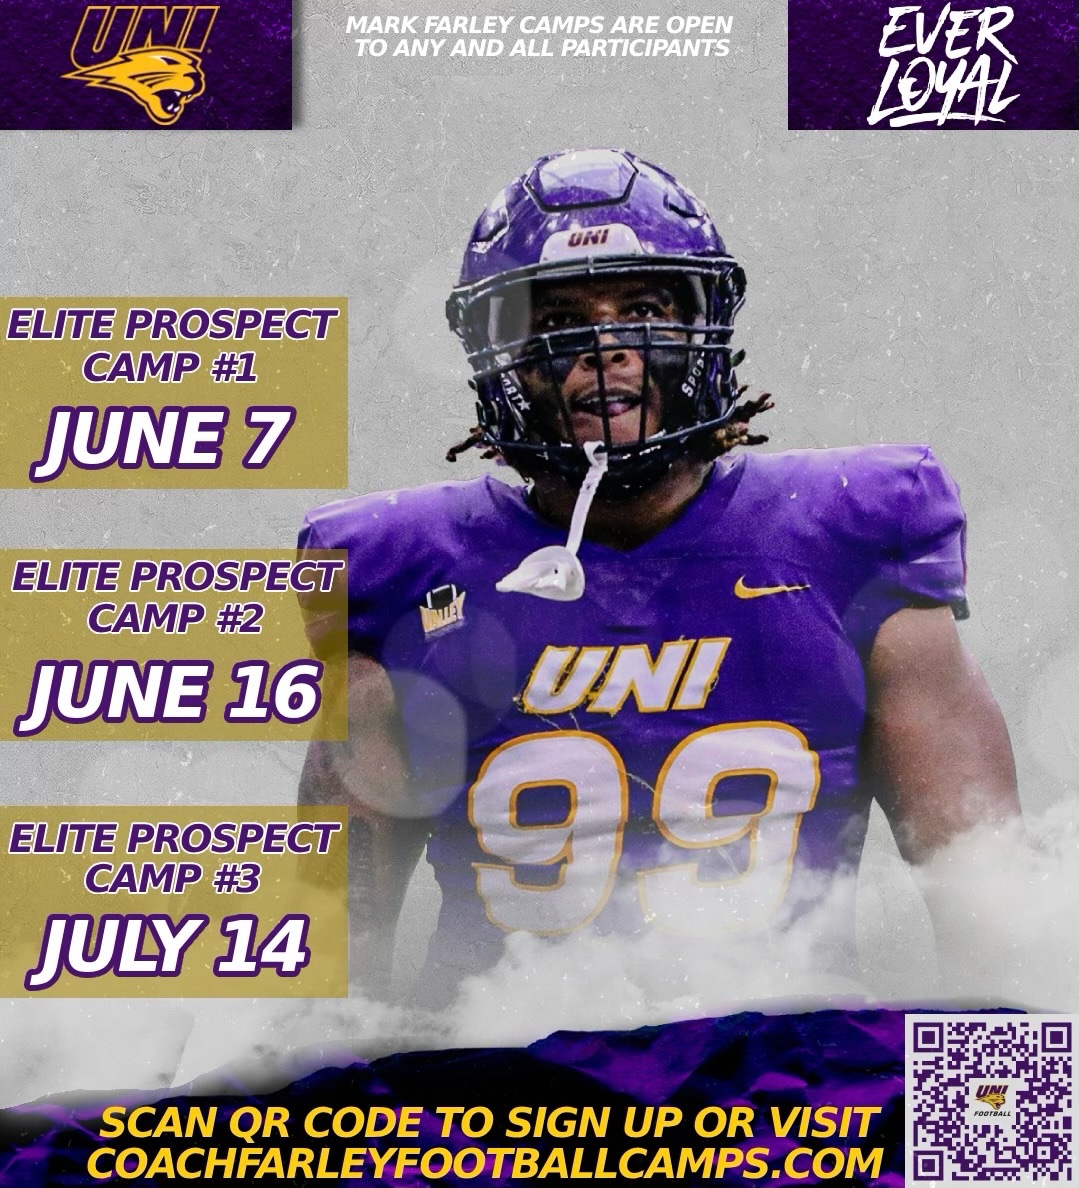 Camp season is right around the corner! Looking forward to working with all the prospects this summer! #EverLoyal